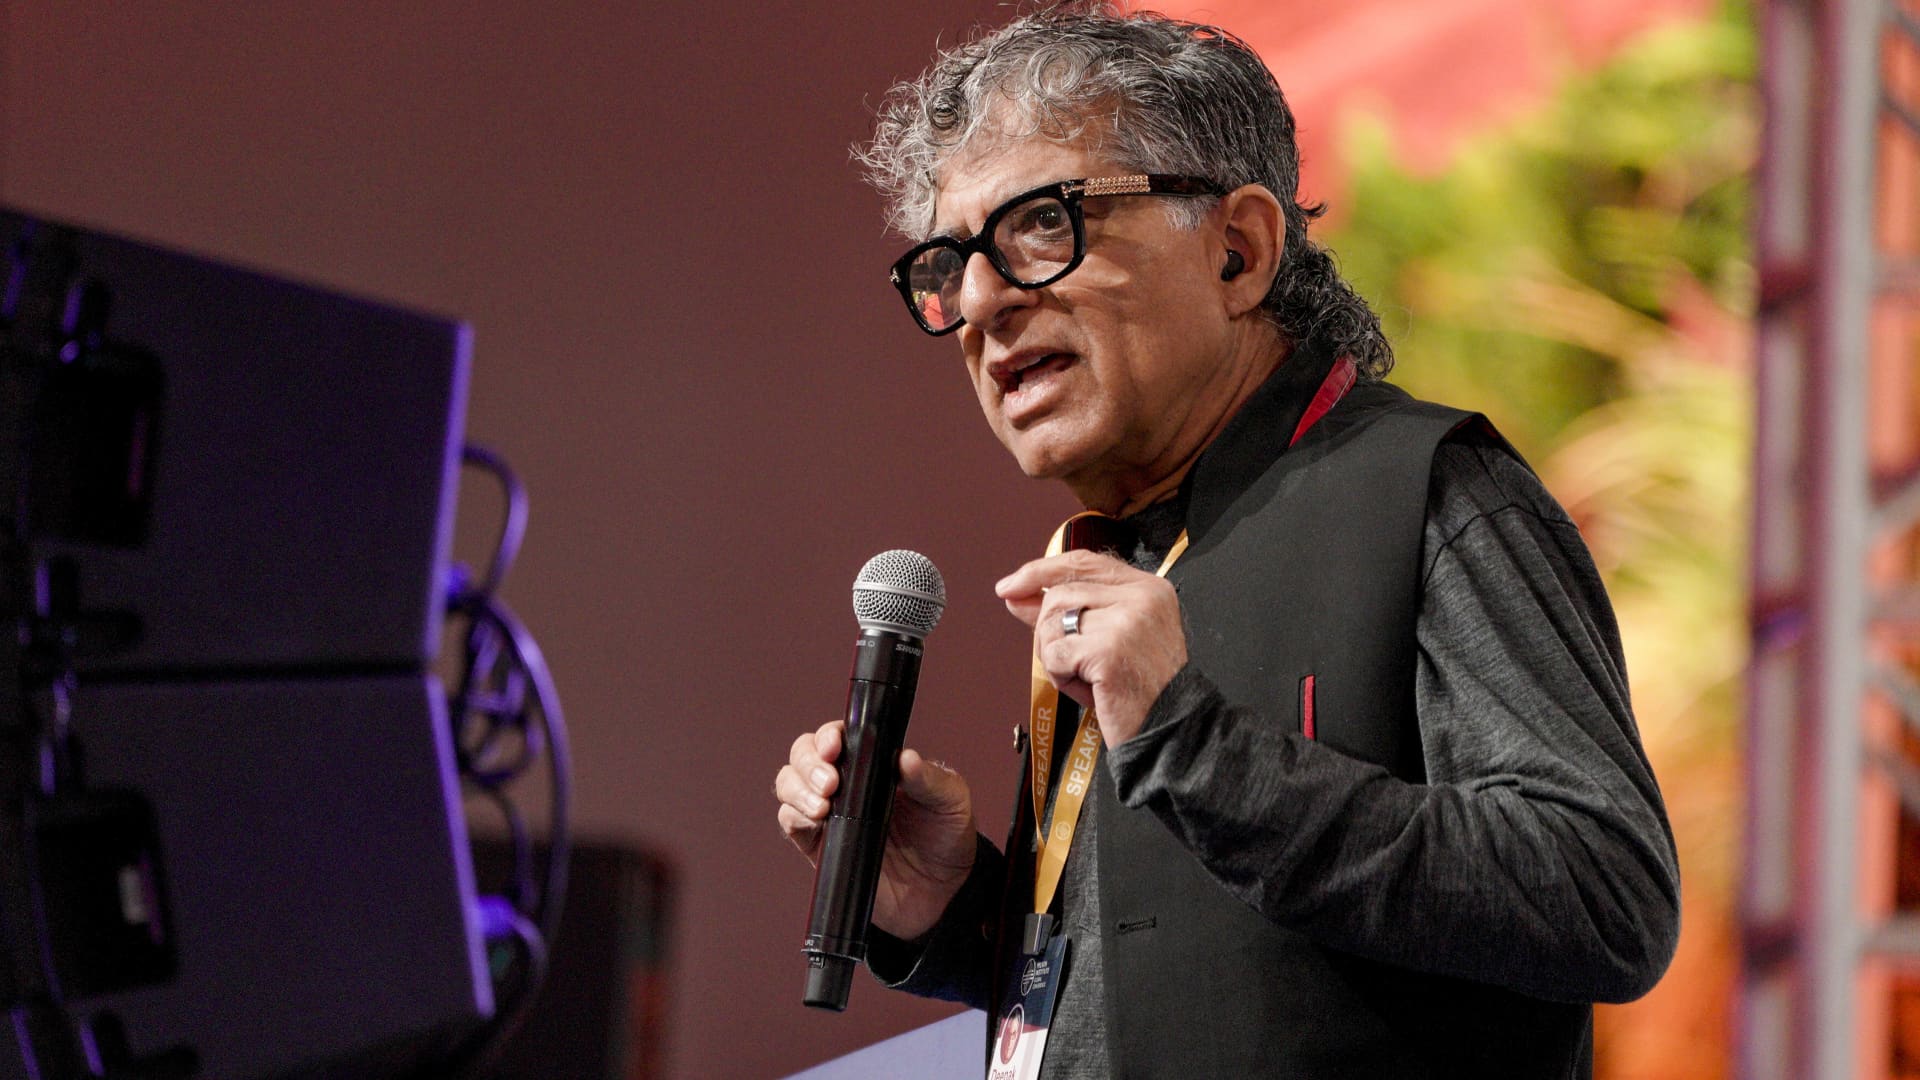 Deepak Chopra, founder of the Chopra Foundation and Chopra Global, speaks during the Milken Institute Global Conference in Beverly Hills, California, on Oct. 18, 2021.